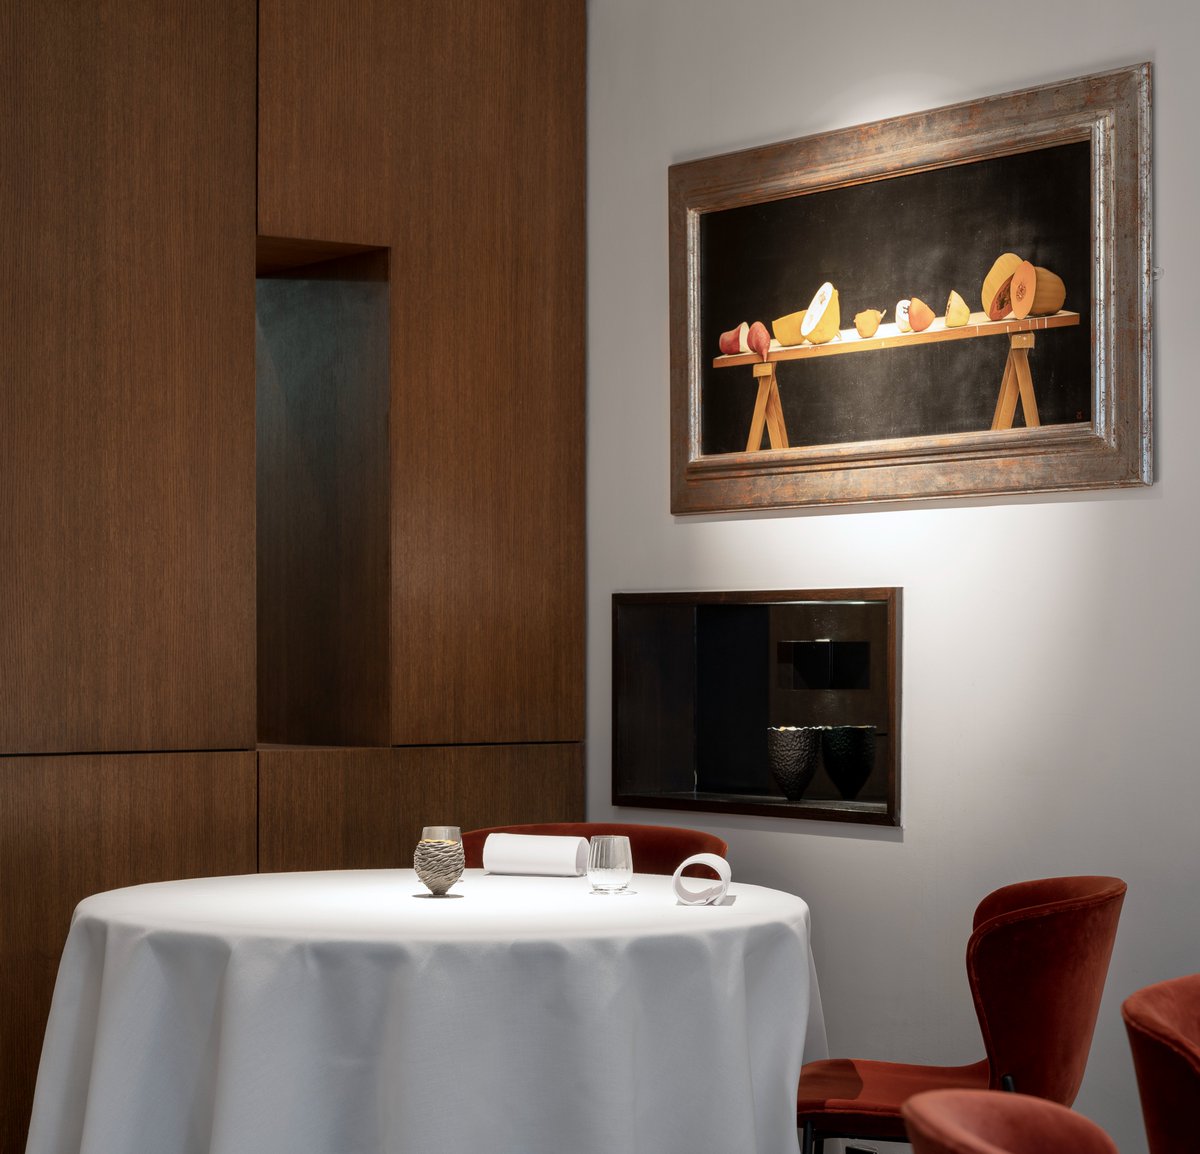 Elemental luxury - just some of the new photographs of the interior as redesigned by @MariaMacVeigh when Mickael became Chef-Patron. Photos by Donal Murphy. New flooring, seating, wall finishes, lighting. But the painting of the Lady remains in situ. Naturally.